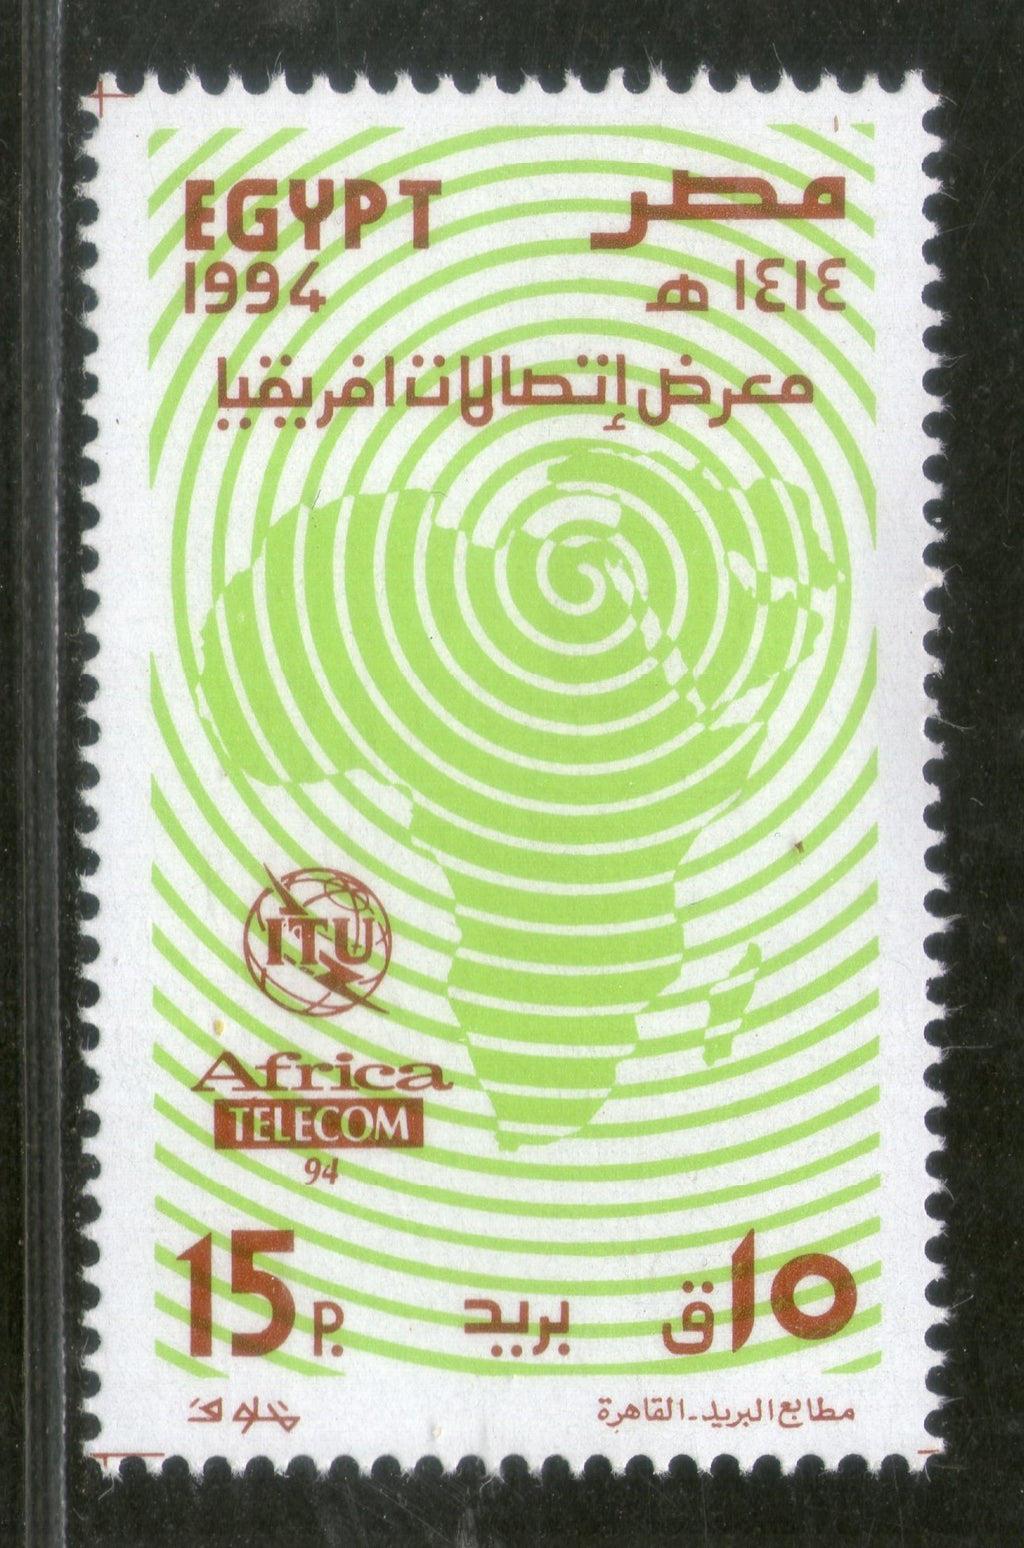 Egypt 1994 African Telecommunications Exhibition ITU Map Sc 1554 MNH # 199 - Phil India Stamps